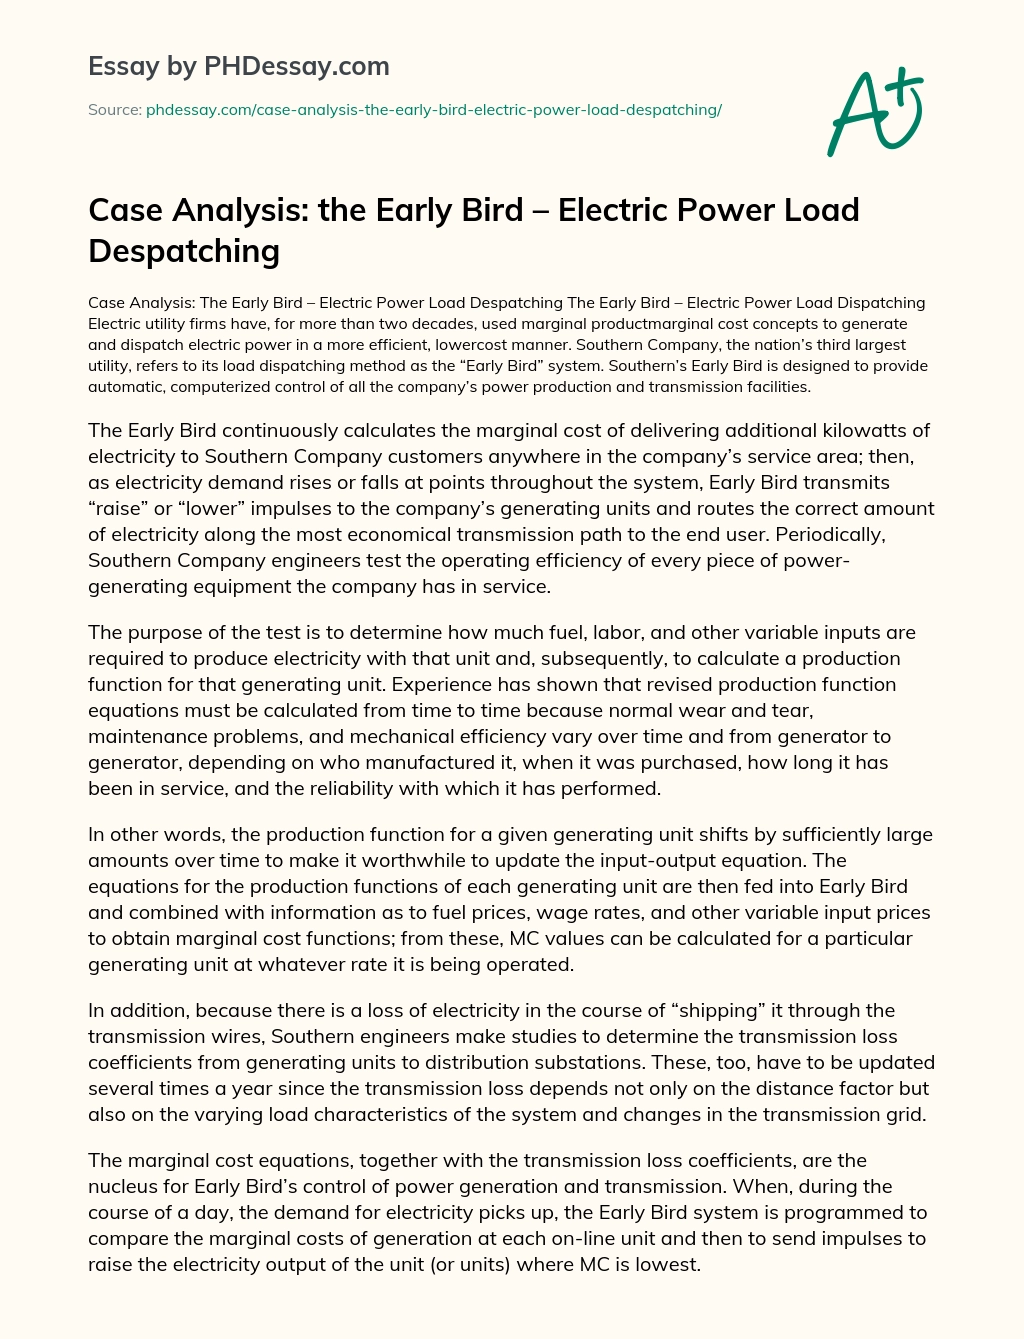 Case Analysis: the Early Bird – Electric Power Load Despatching essay